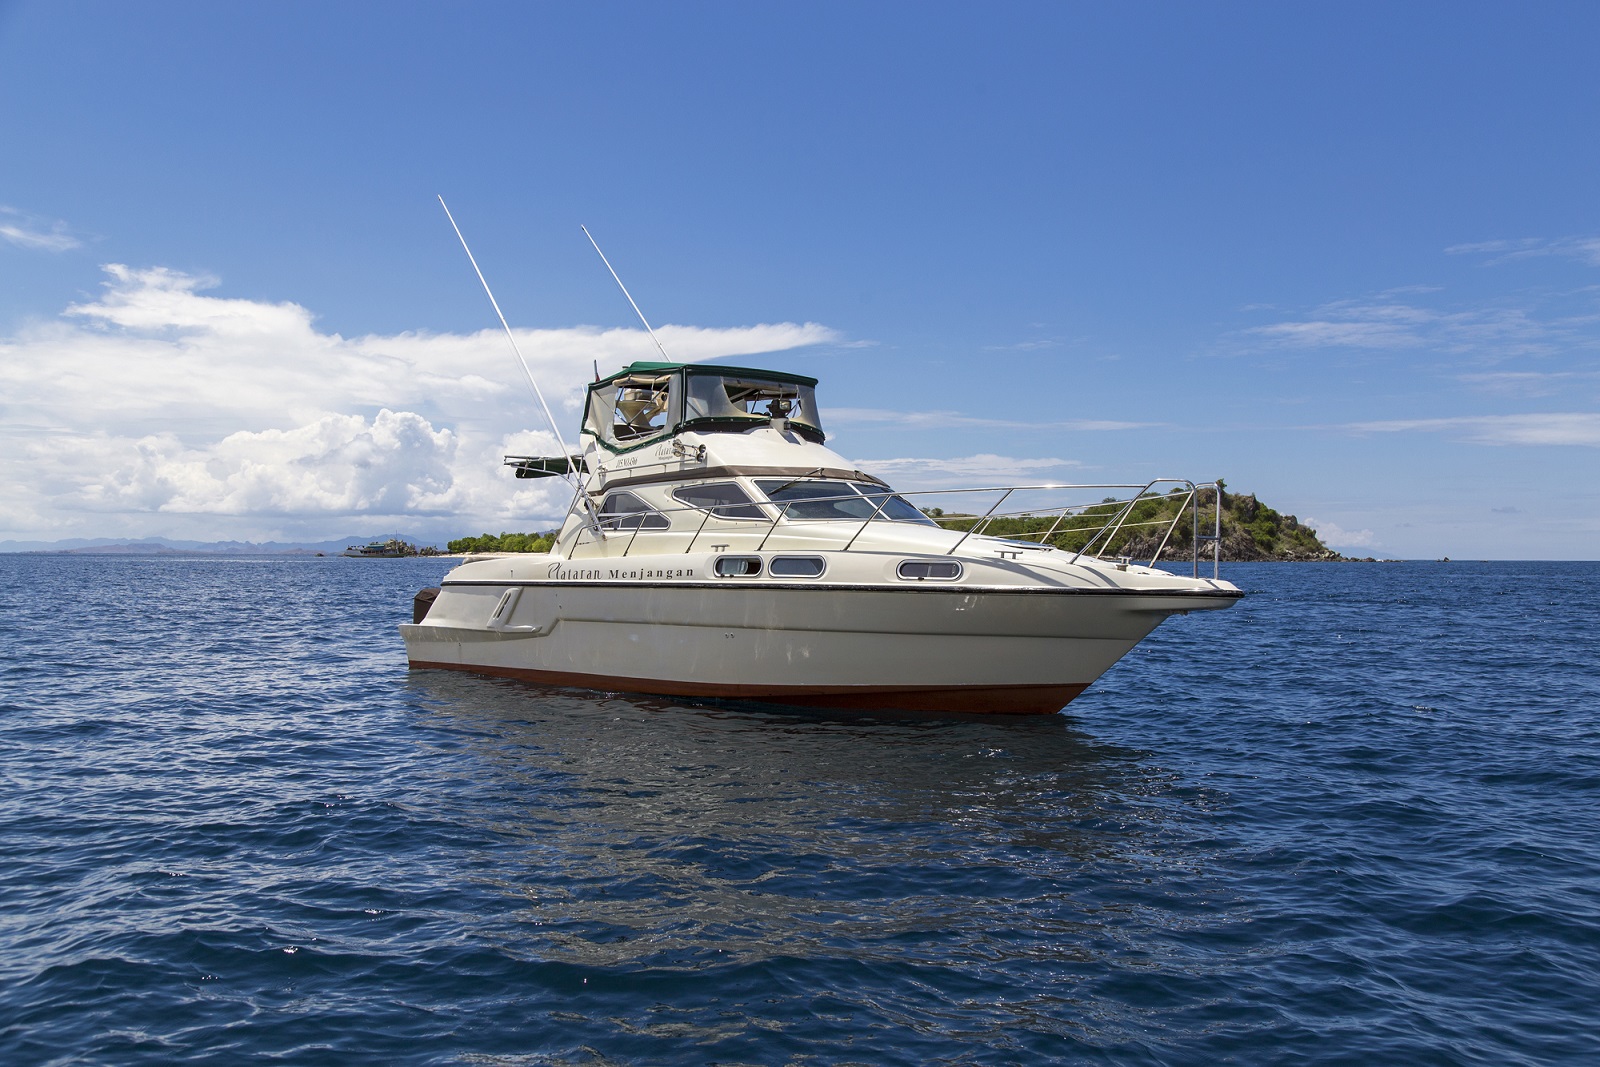 Komodo 3D2N by Private Yacht or Speed Boat Charter - Komodo Boat Charter